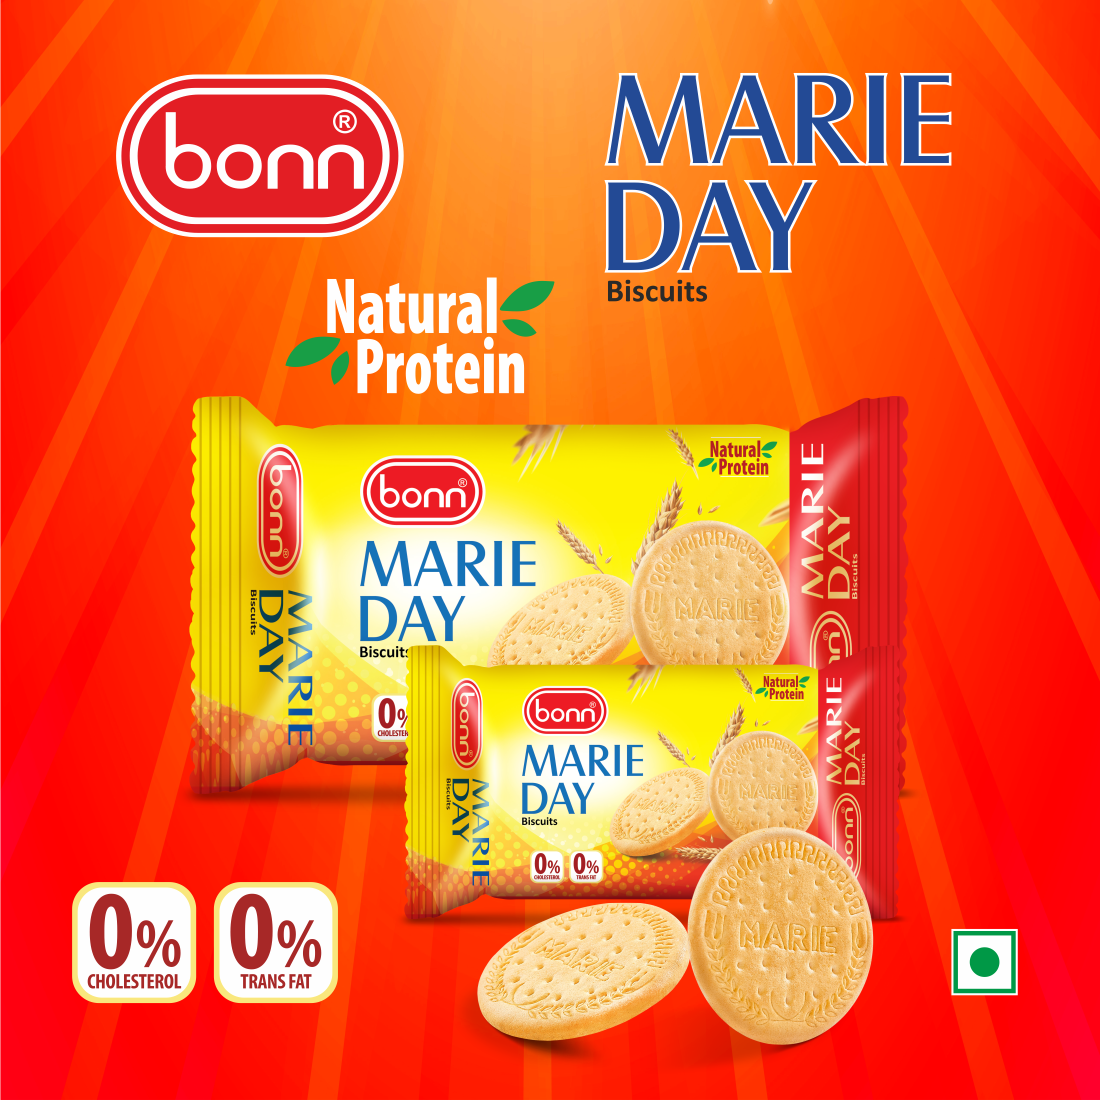 Bonn Marie Day Biscuits, Cholestrol Free, TransFat Free, Natural Protein, 80 g Pack